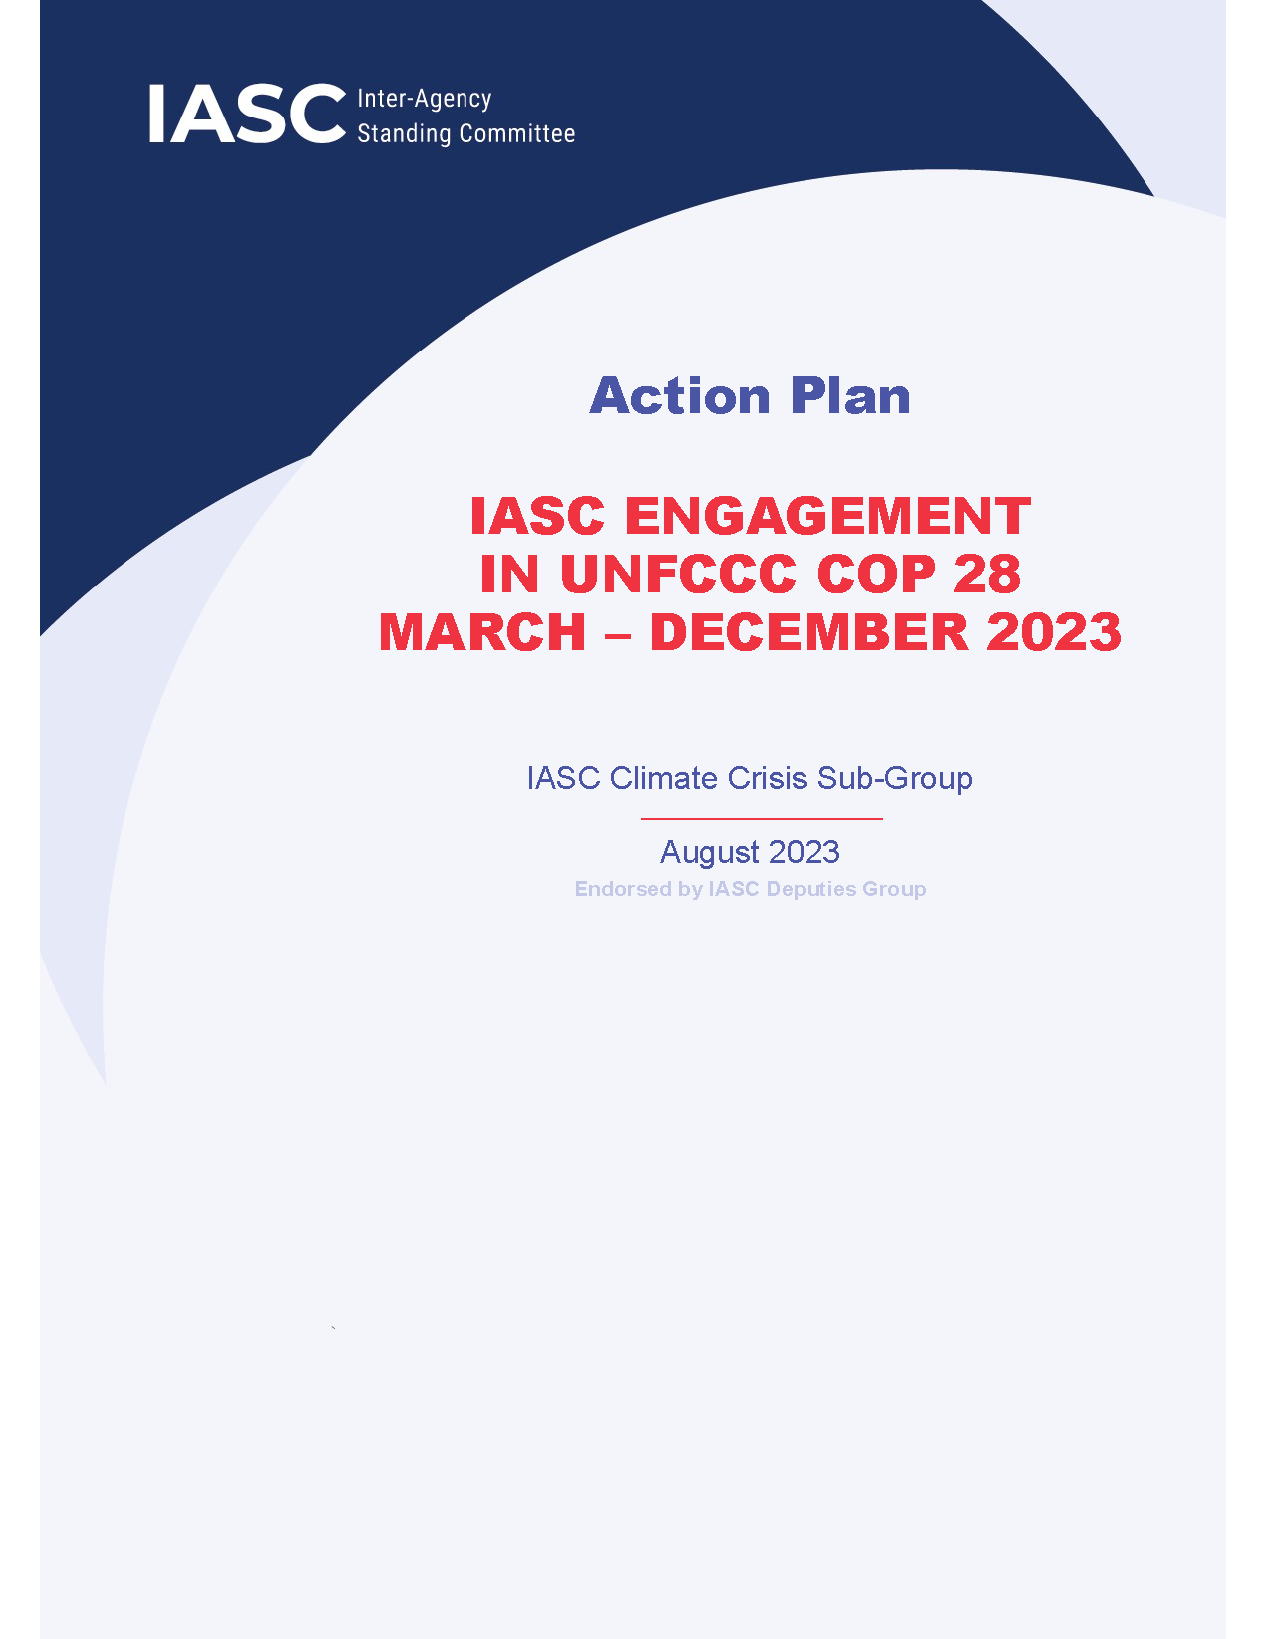 IASC Action Plan on Engagement in UNFCC COP 28